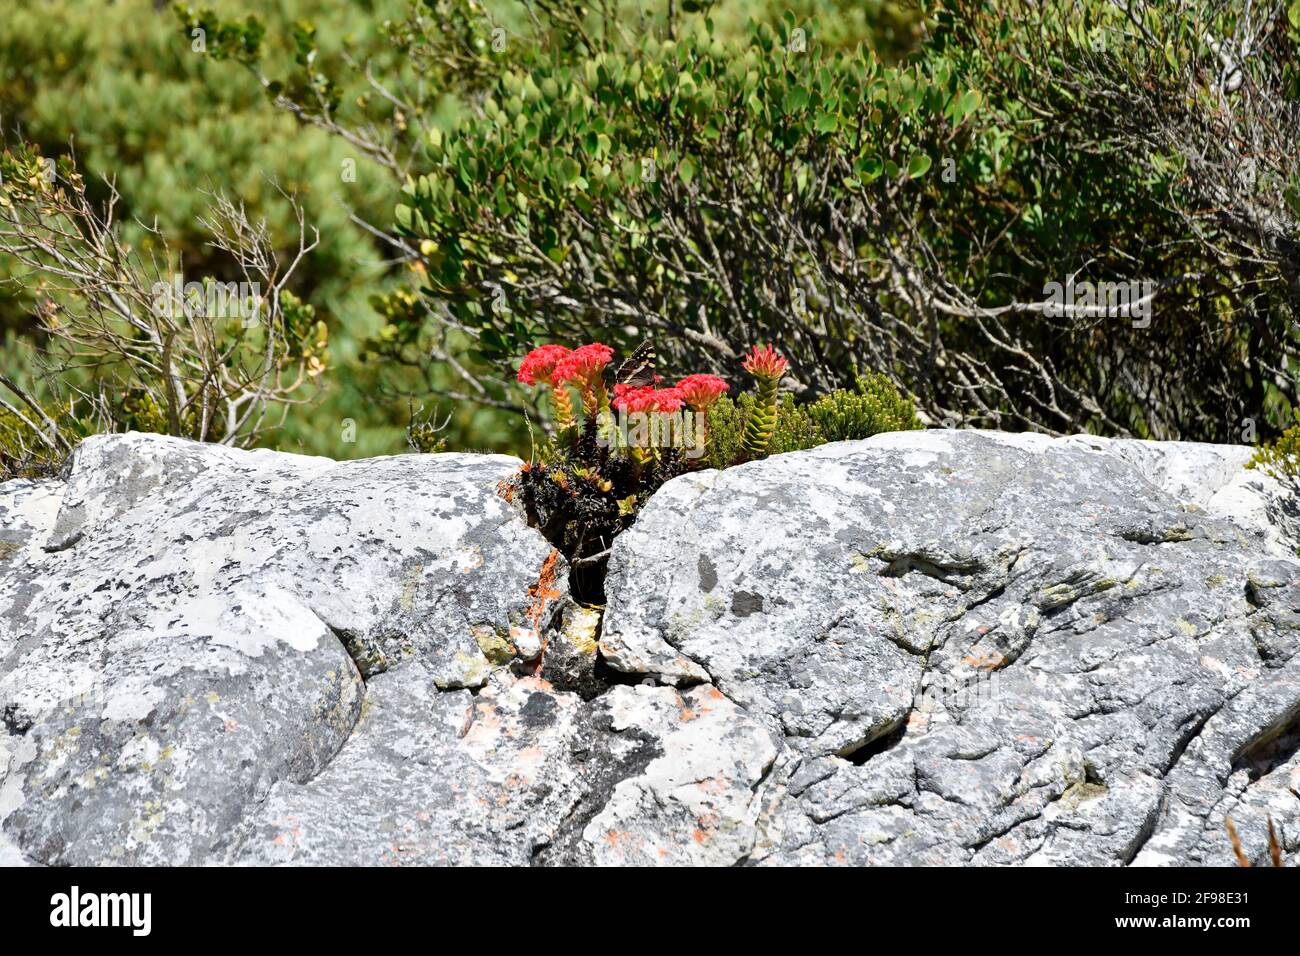 Red crassula [Crassula coccinea], flowering in sandstone rocks of south-west Cape, with attending Citrus Swallowtail butterfly [Papilio demodocus], South Africa. Stock Photo